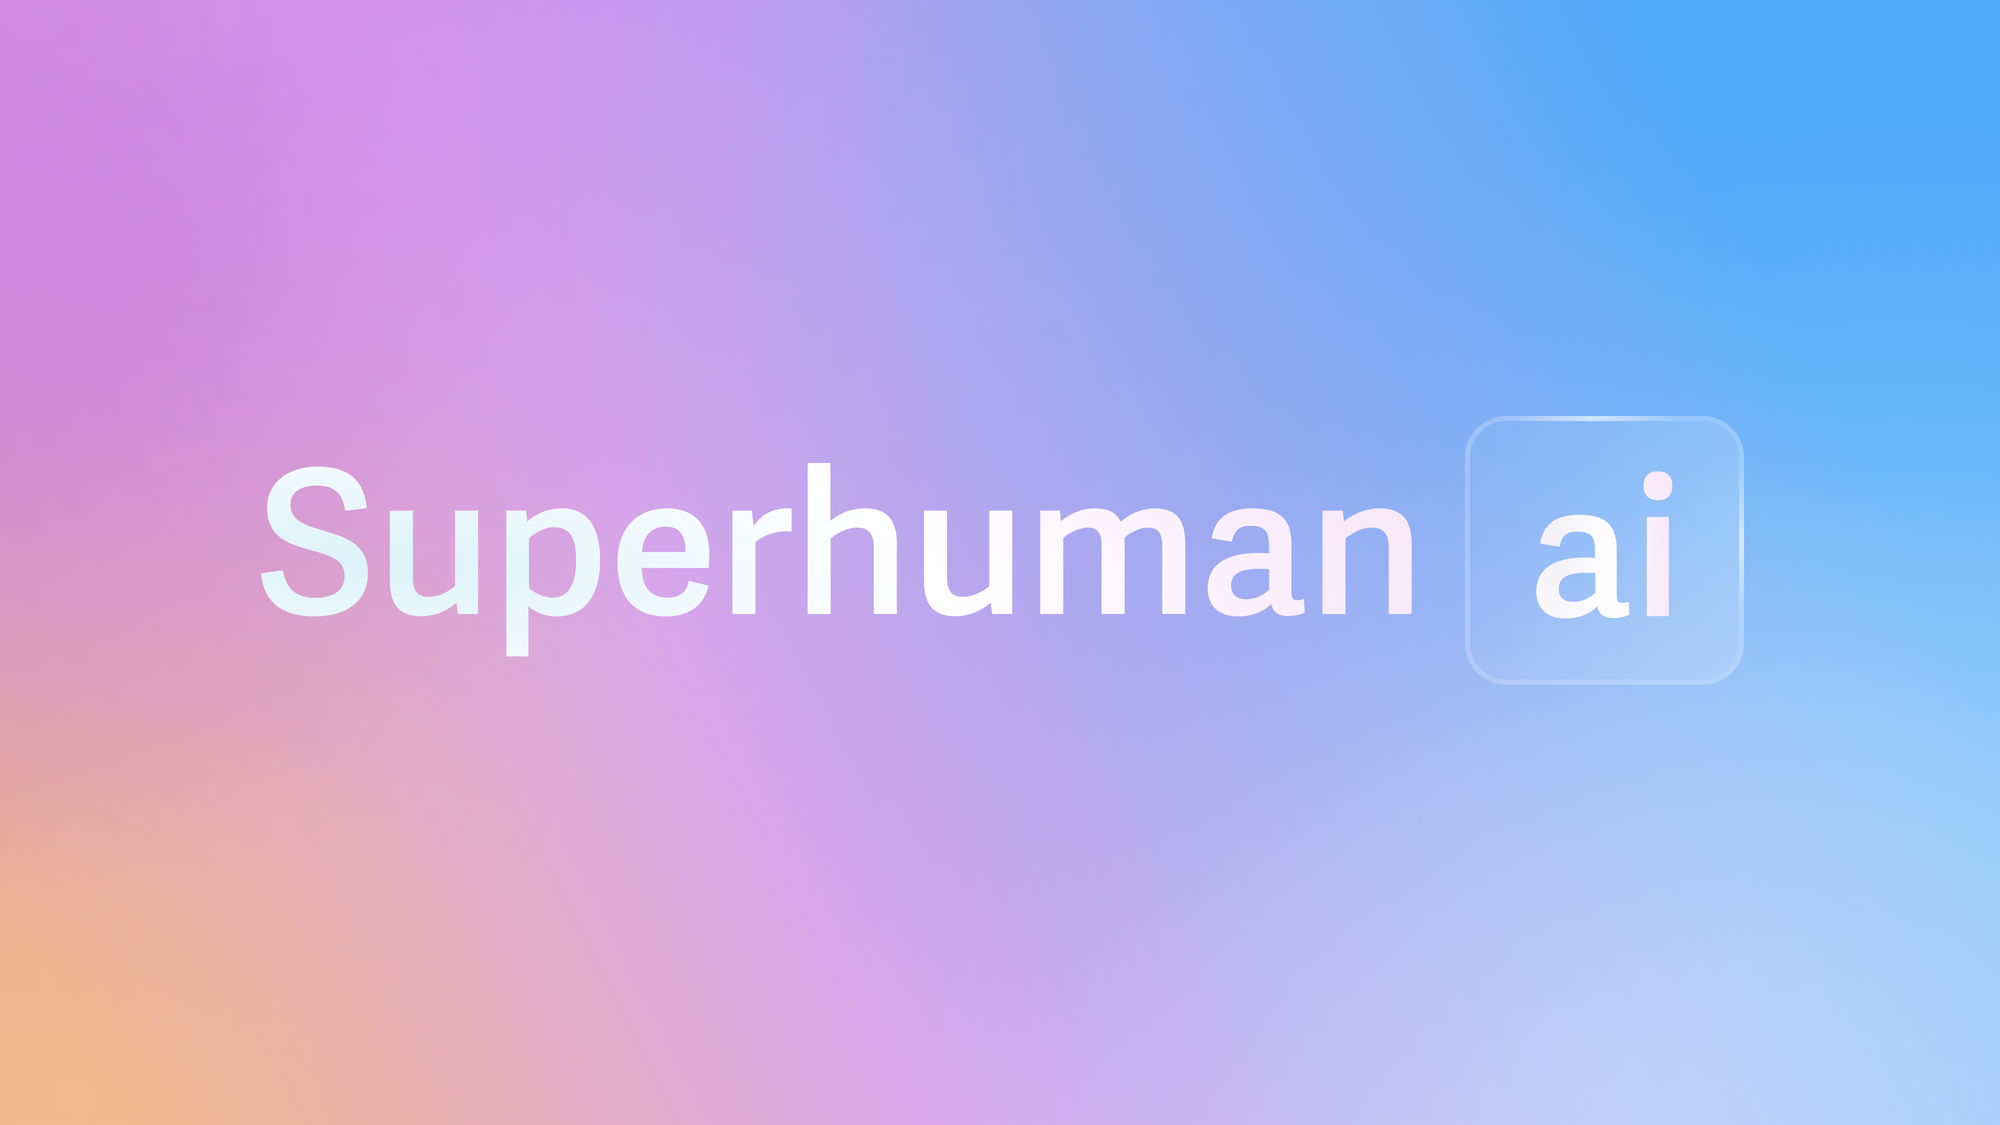 Superhuman AI - Superhuman AI helps people write emails faster and smarter